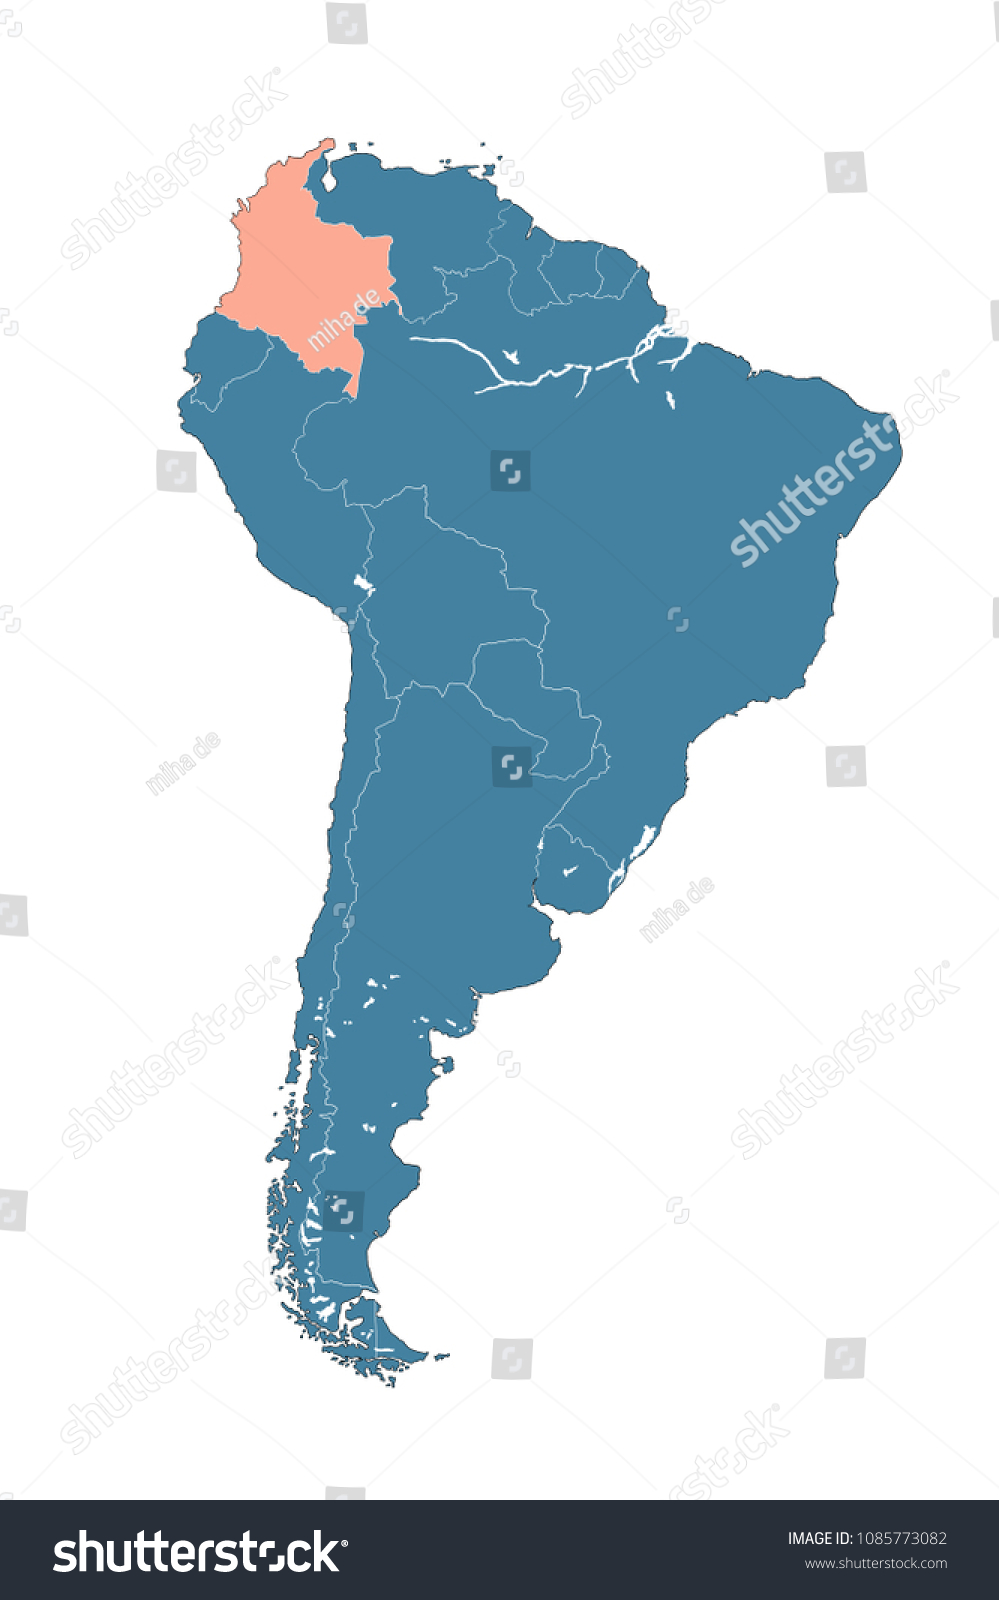 Colombia On Map Of South America Colombia On Map South America Stock Illustration 1085773082 | Shutterstock